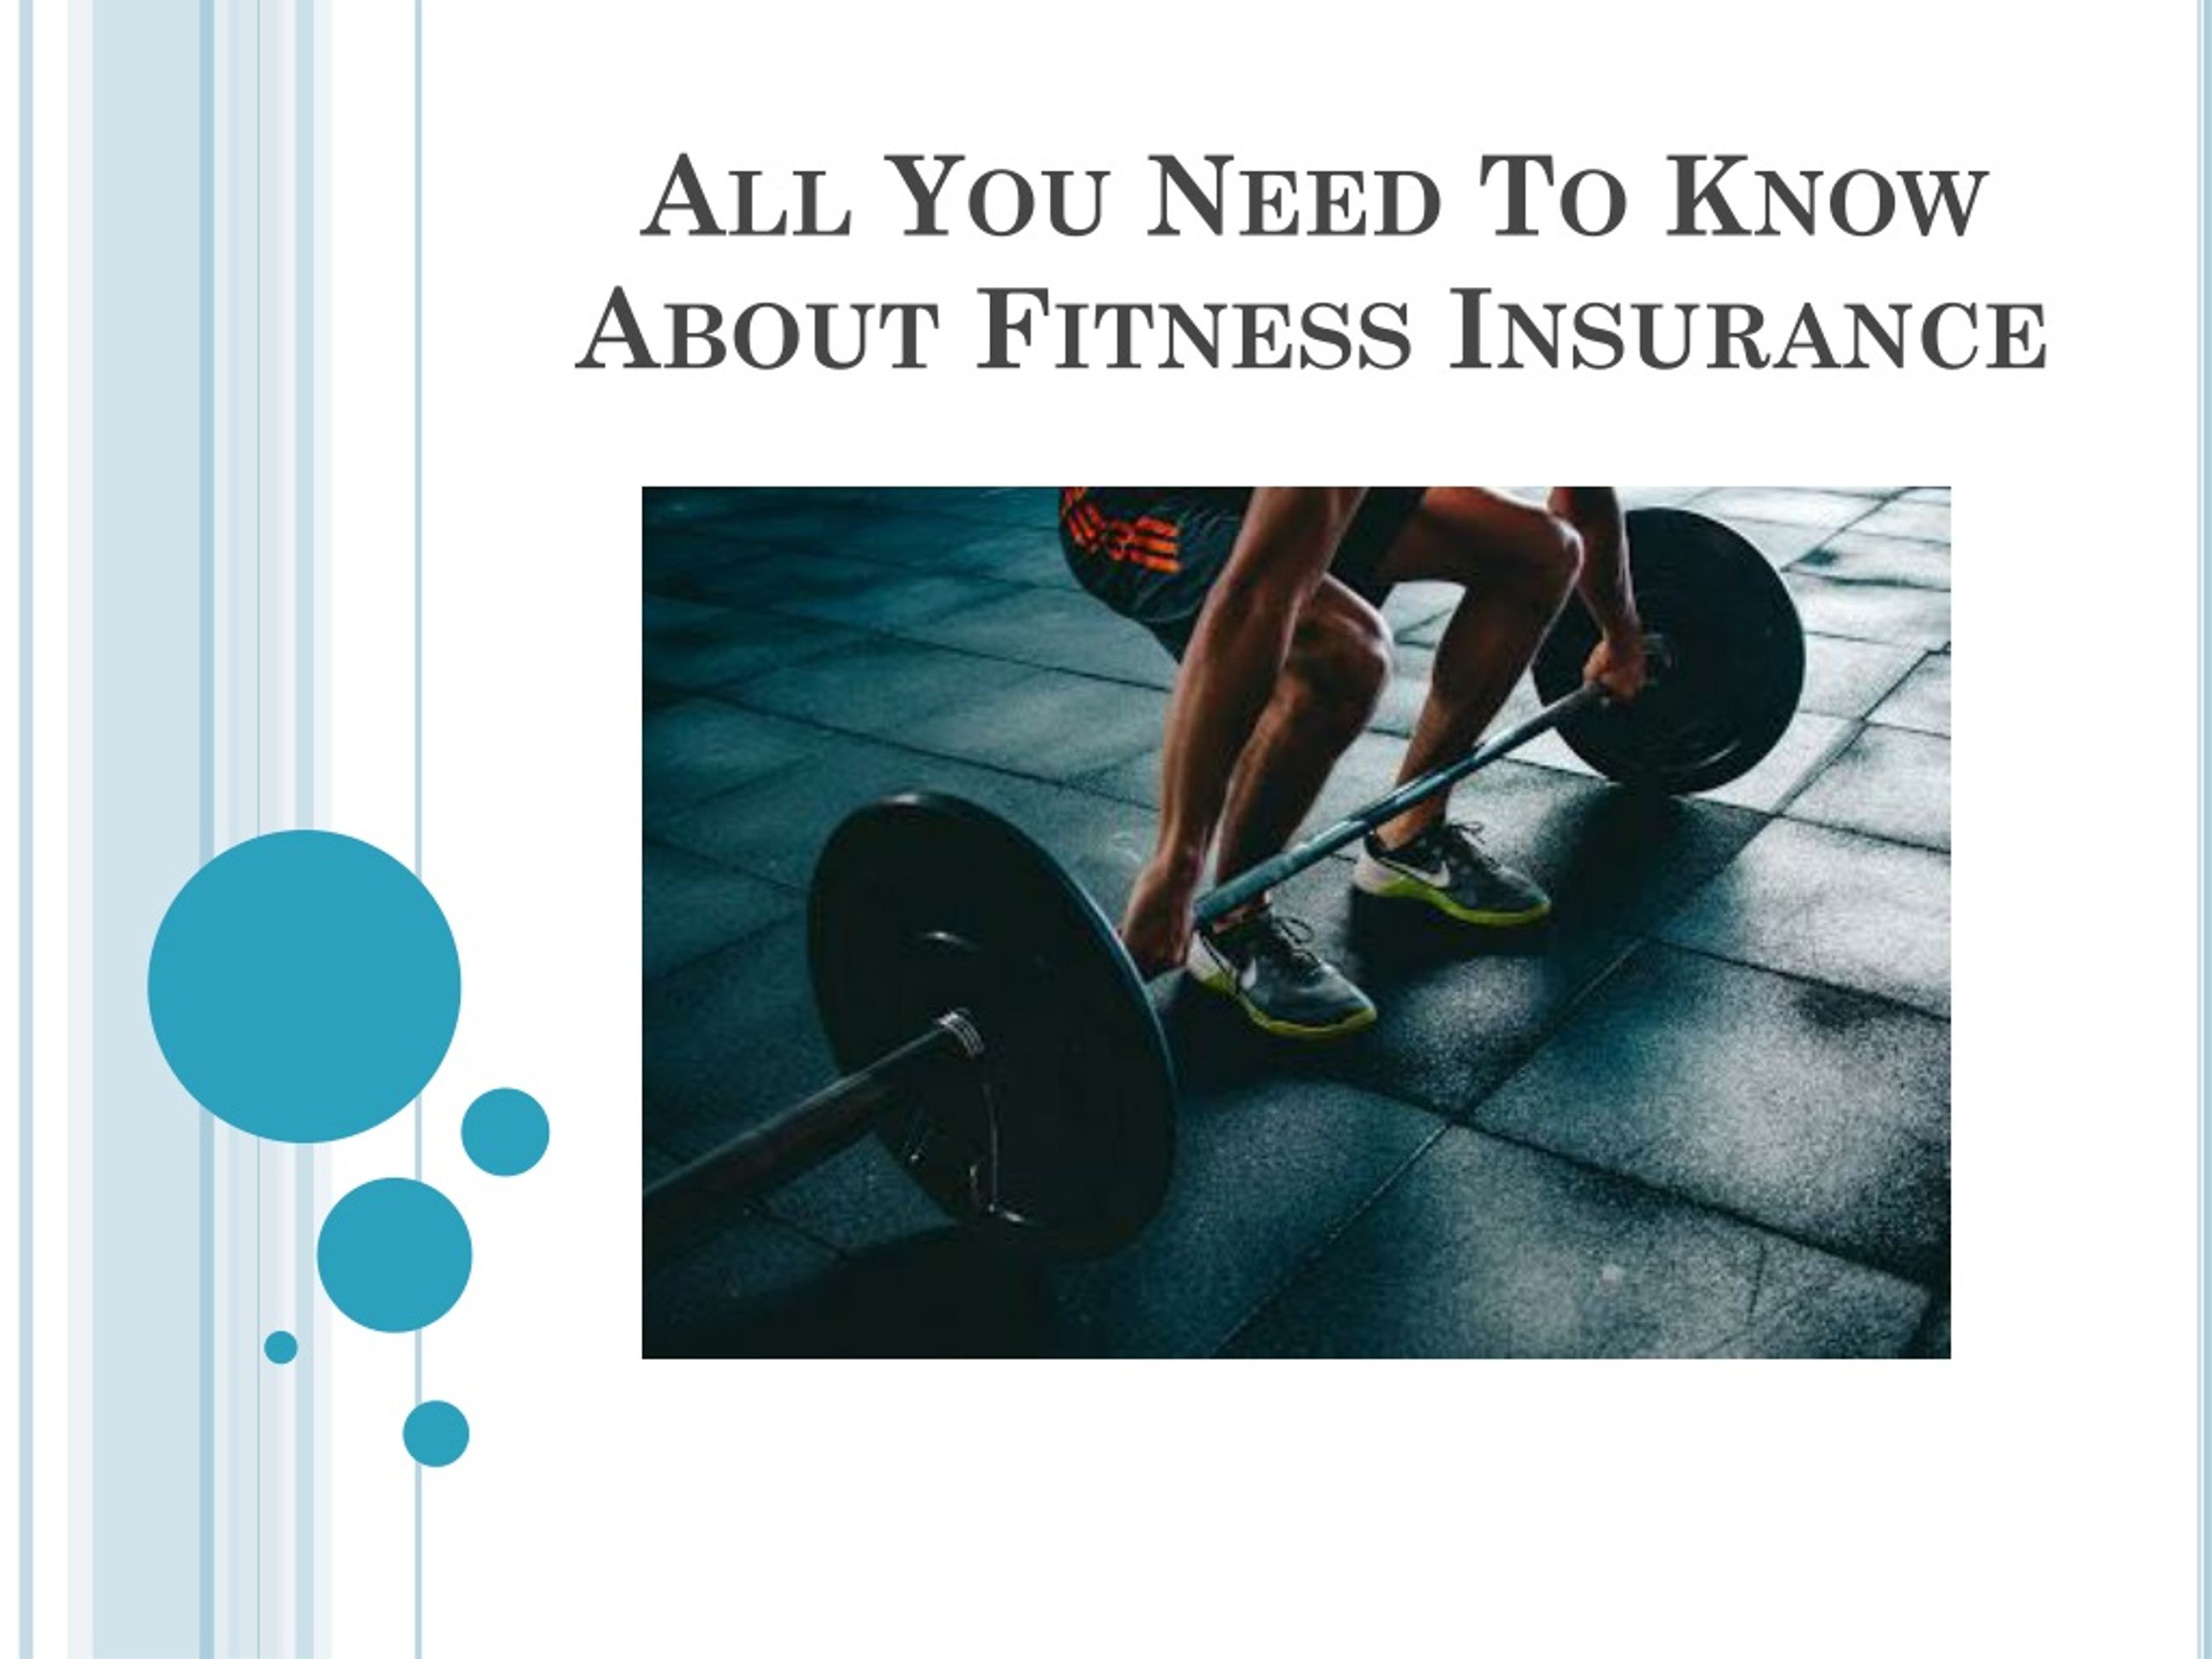 https://image4.slideserve.com/9466095/all-you-need-to-know-about-fitness-insurance-l.jpg